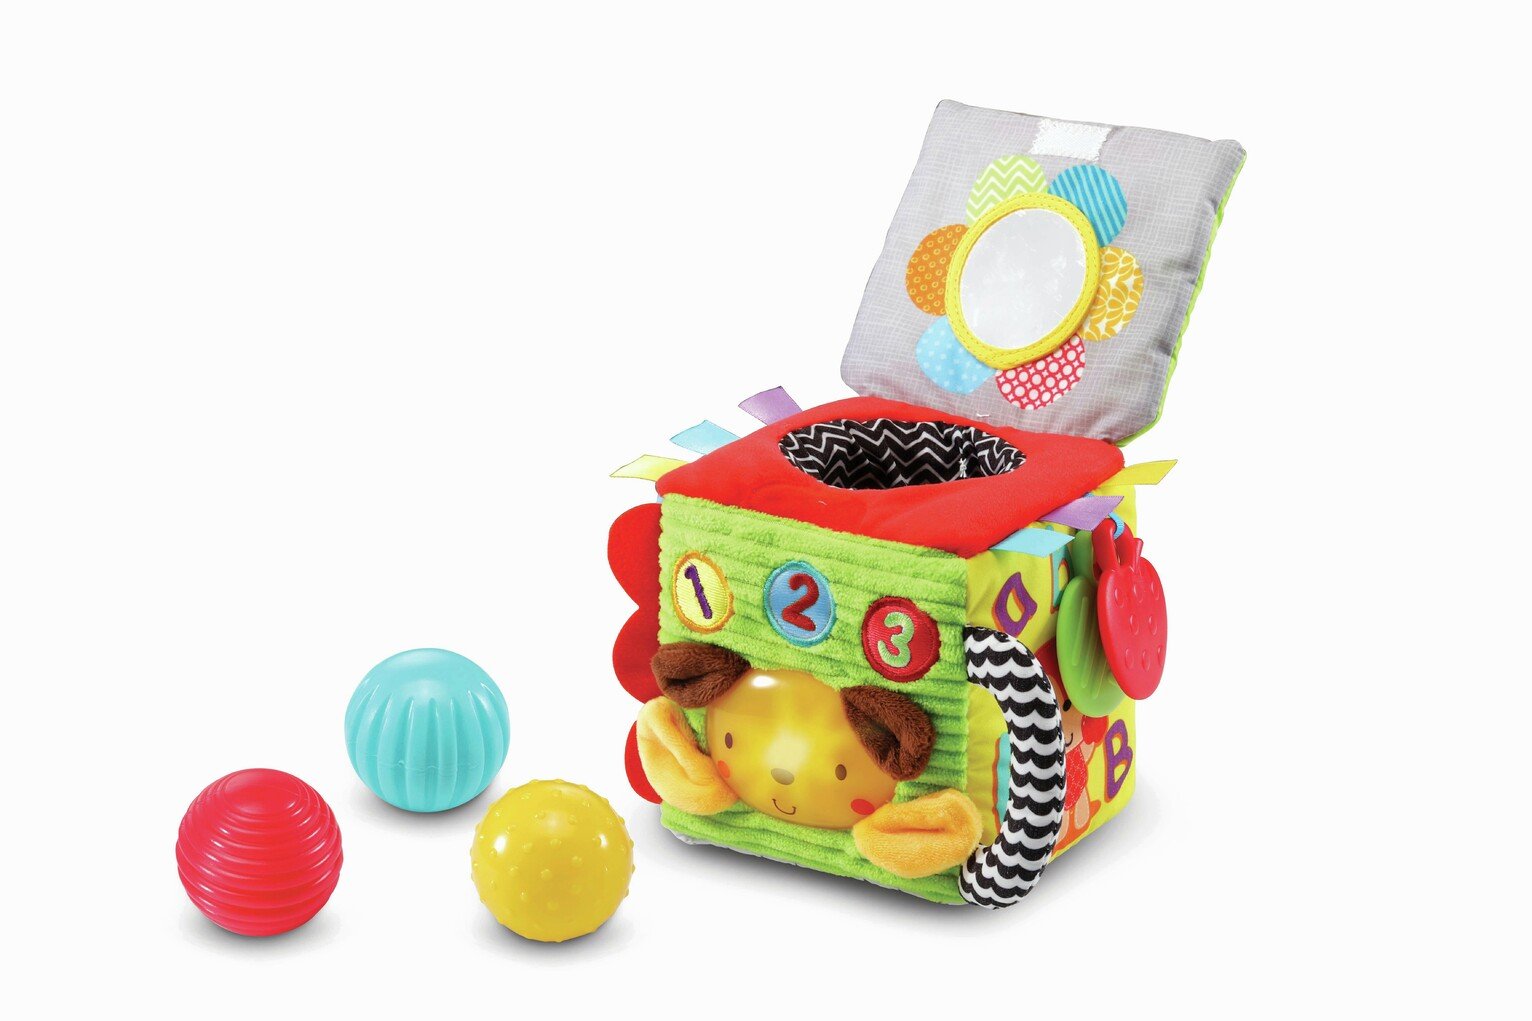 VTech Little Friends Discovery Ball Activity Toy Review